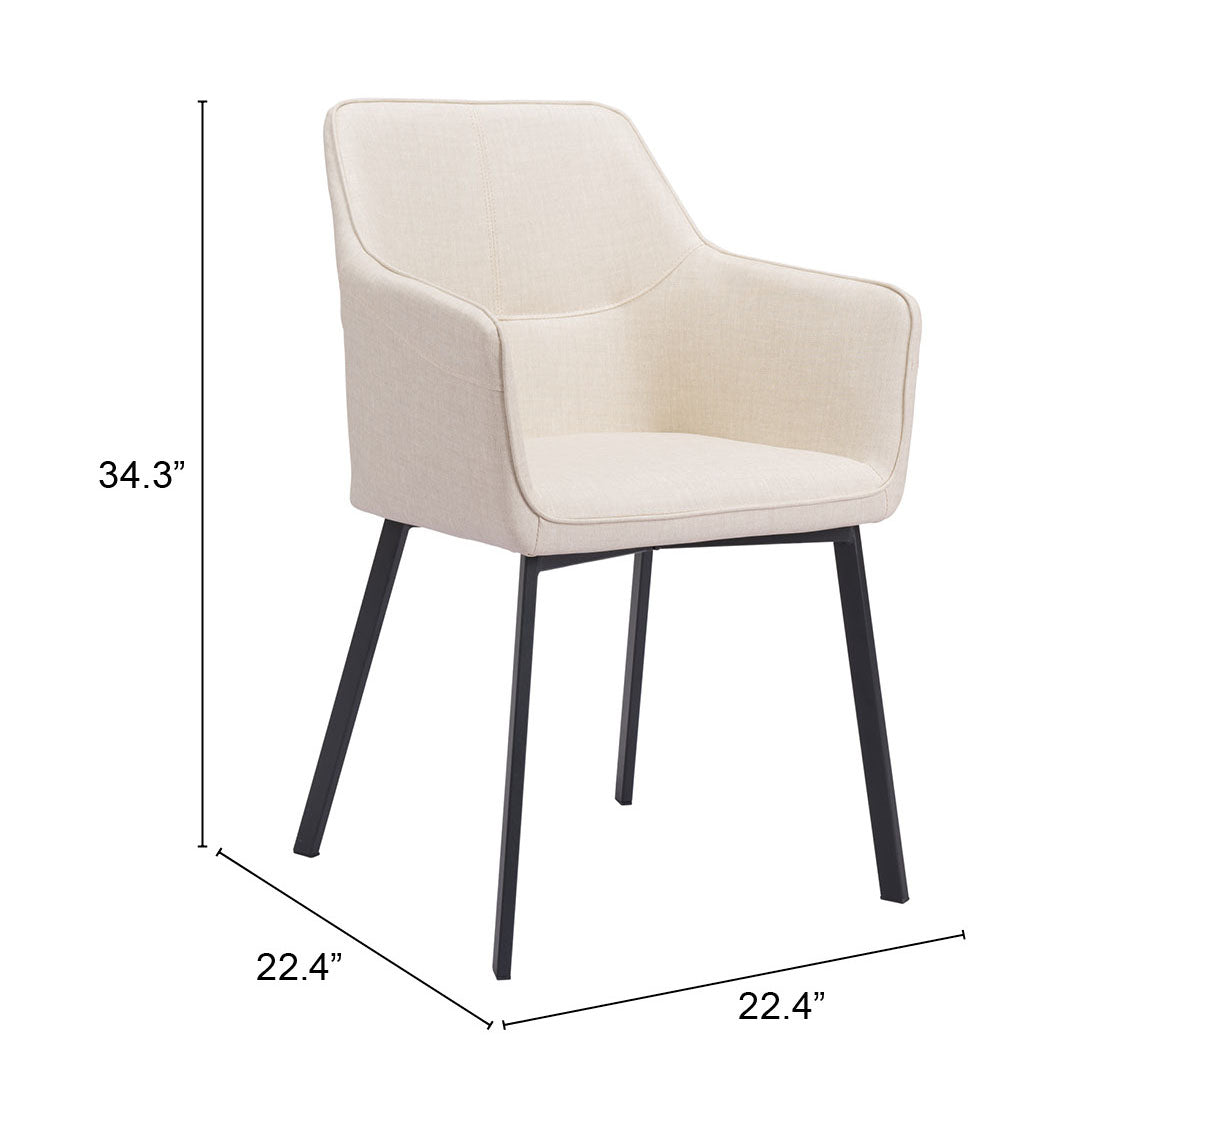 Adage Dining Chair Beige (Set of 2)